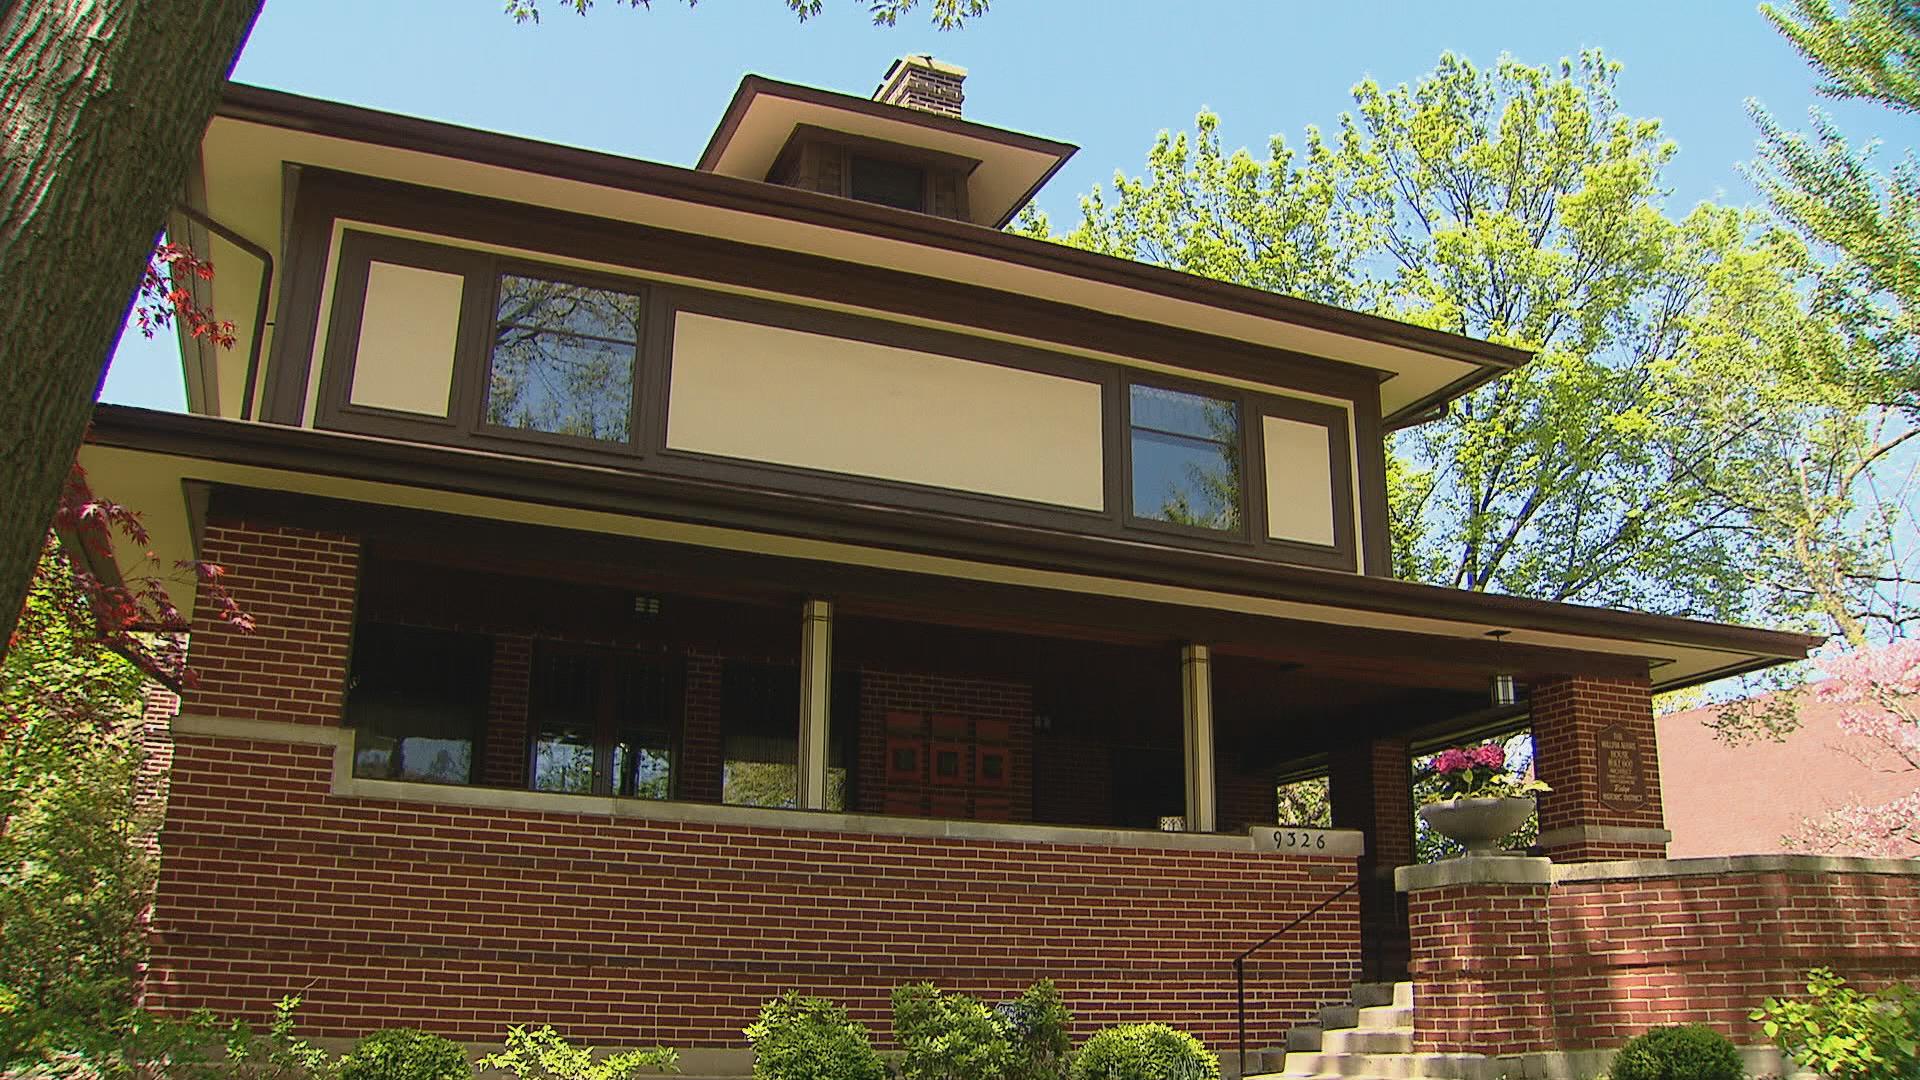 The William Adams House is featured on this year's tour. (Chicago Tonight)